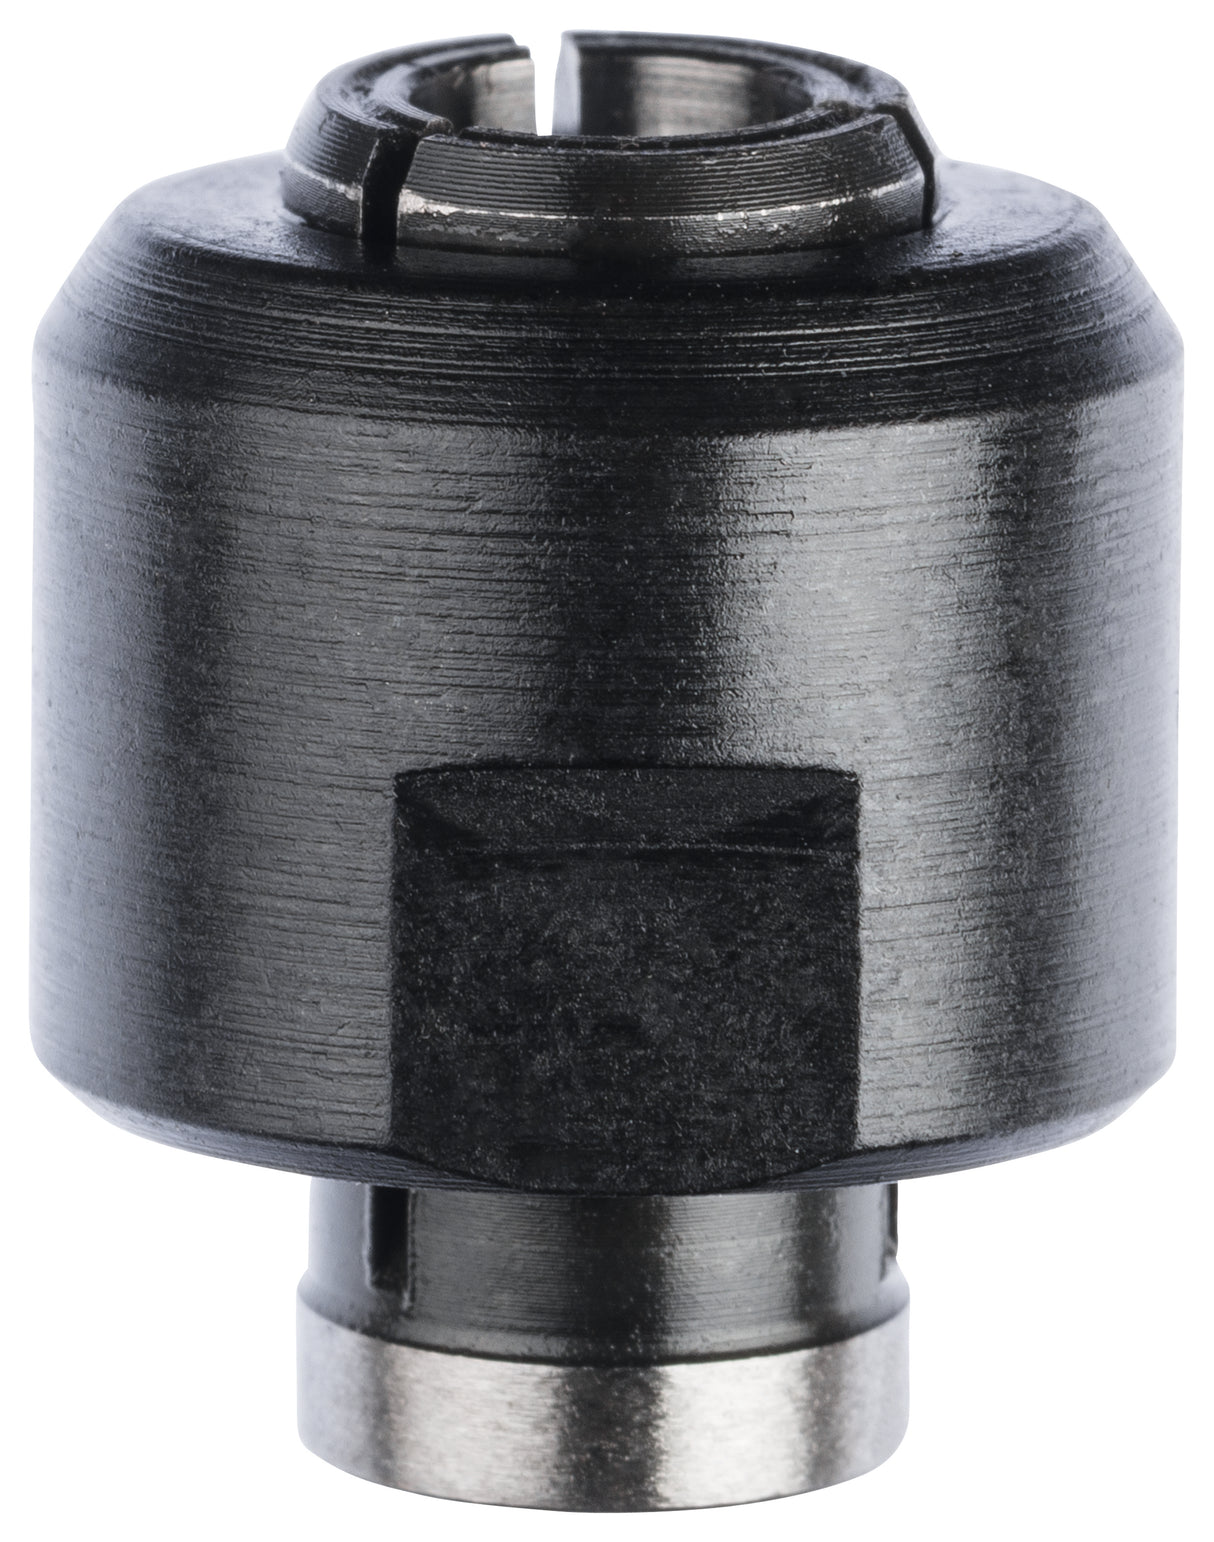 Bosch Professional 1/4" Collet with Locking Nut